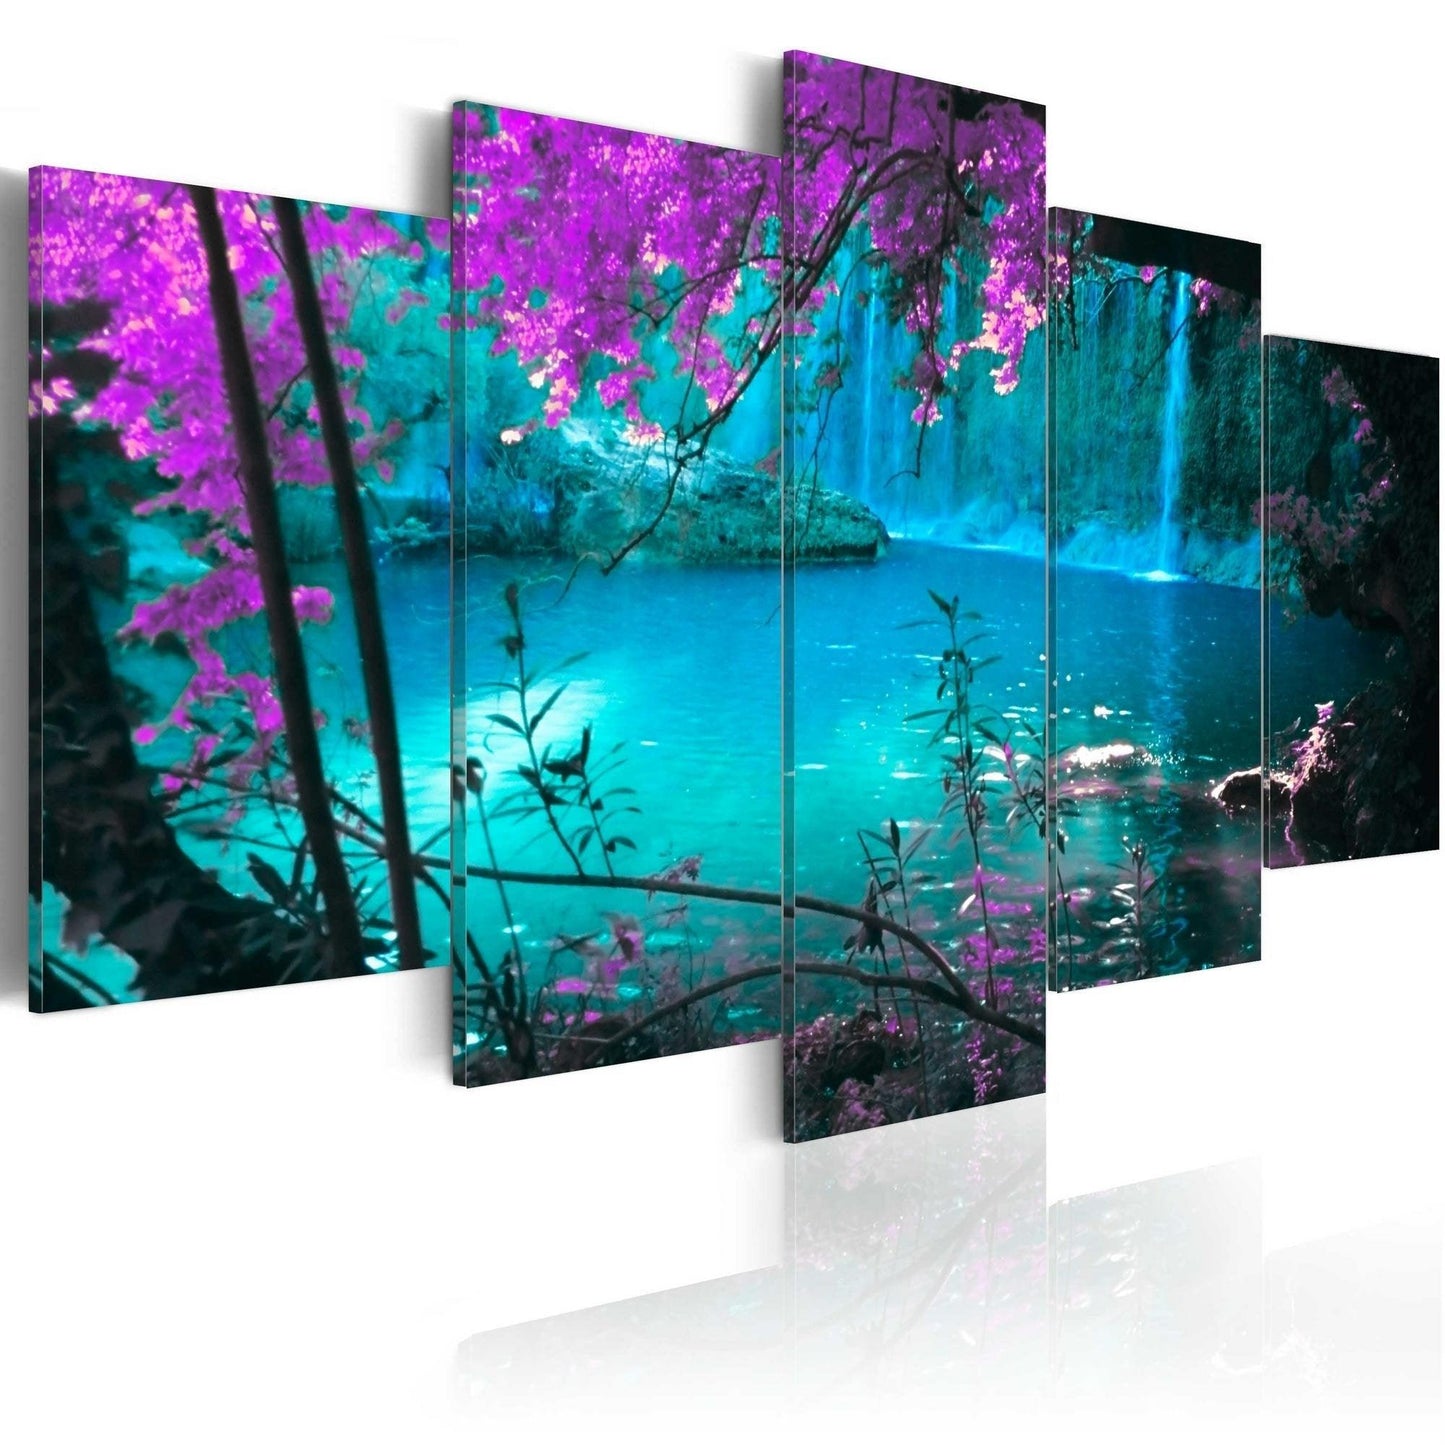 Canvas Print - Calm seclusion - www.trendingbestsellers.com